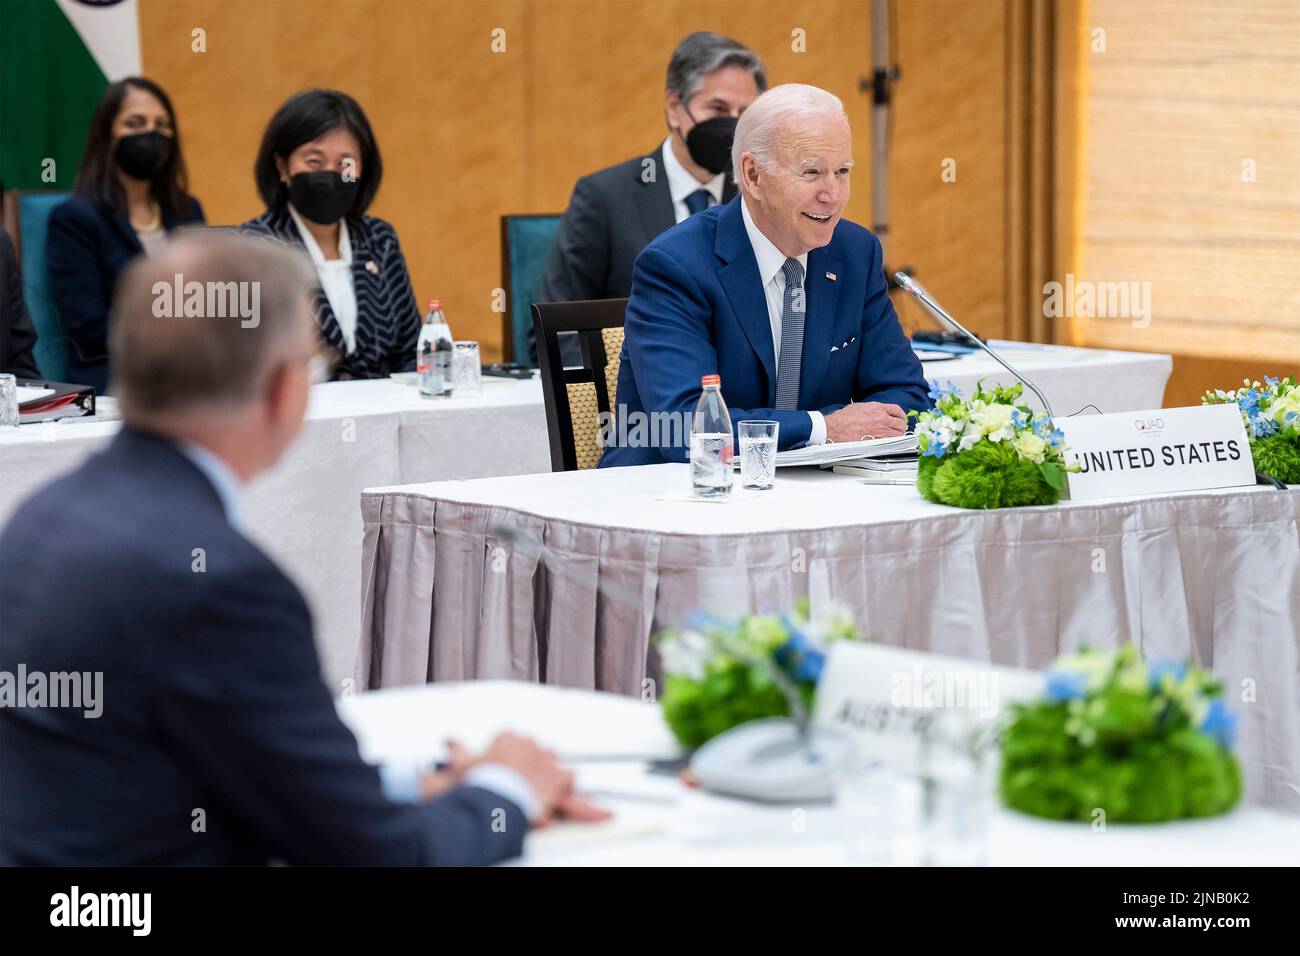 Tokyo, Japan. 24 May, 2022. U.S. President Joe Biden, center, delivers remarks during the Quad Leaders Summit at the Japanese Prime Minister residence of Kantei, May 24, 2022, in Tokyo, Japan.  Credit: Adam Schultz/U.S. State Department/Alamy Live News Stock Photo